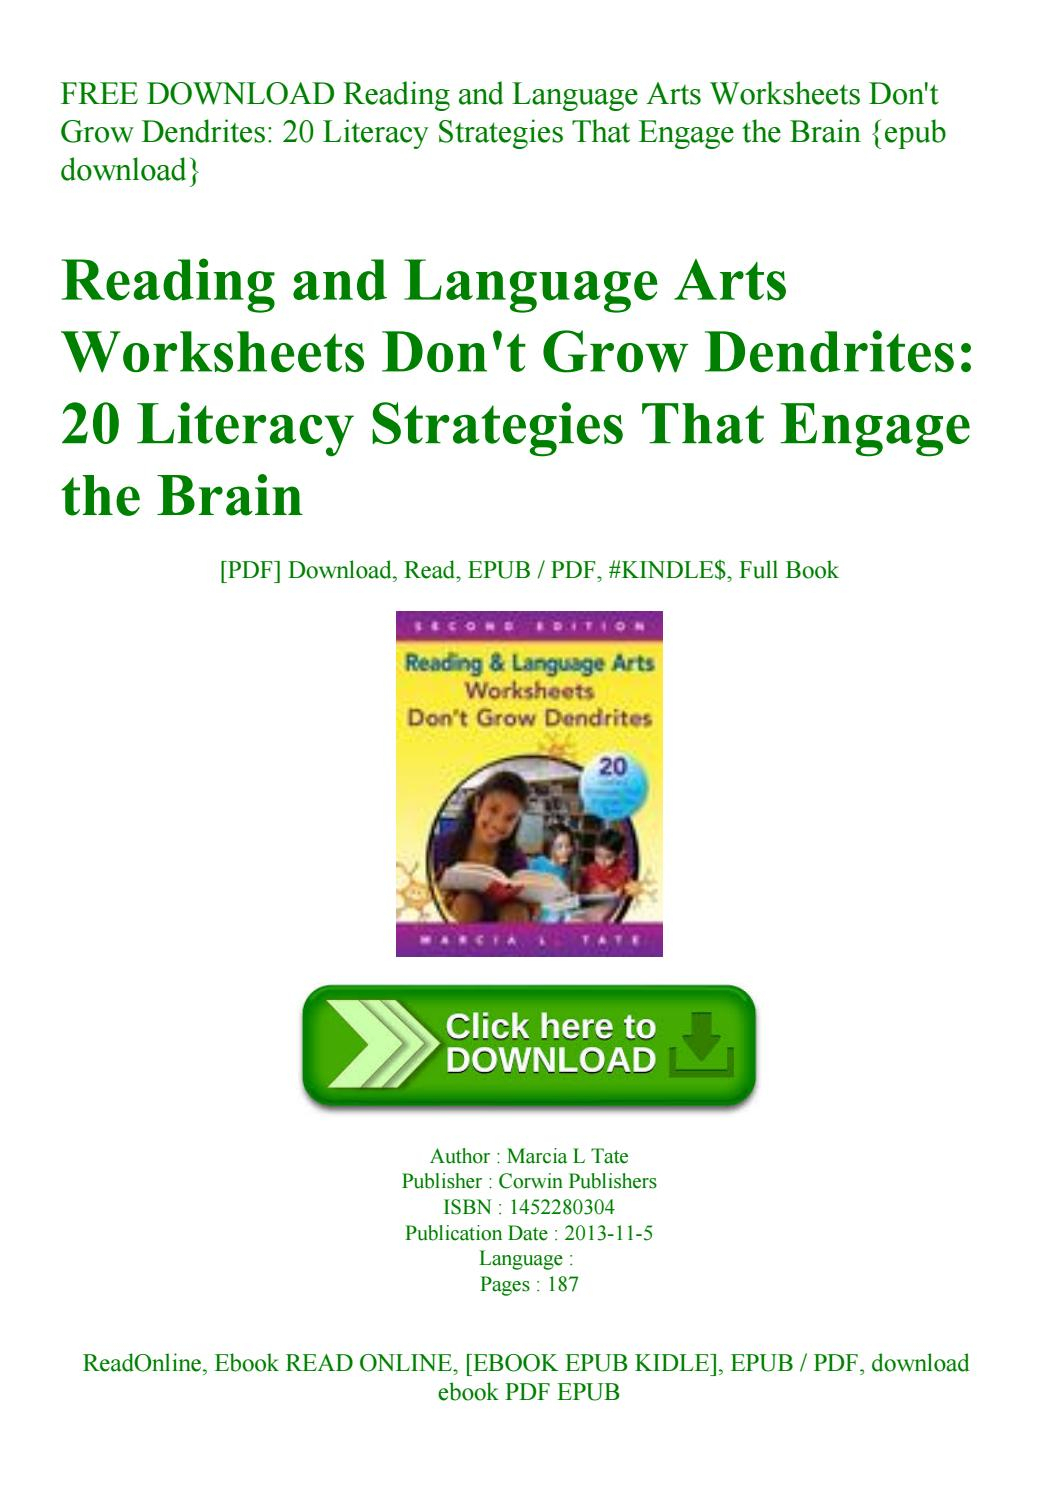 Free Download Reading And Language Arts Worksheets Don't Grow